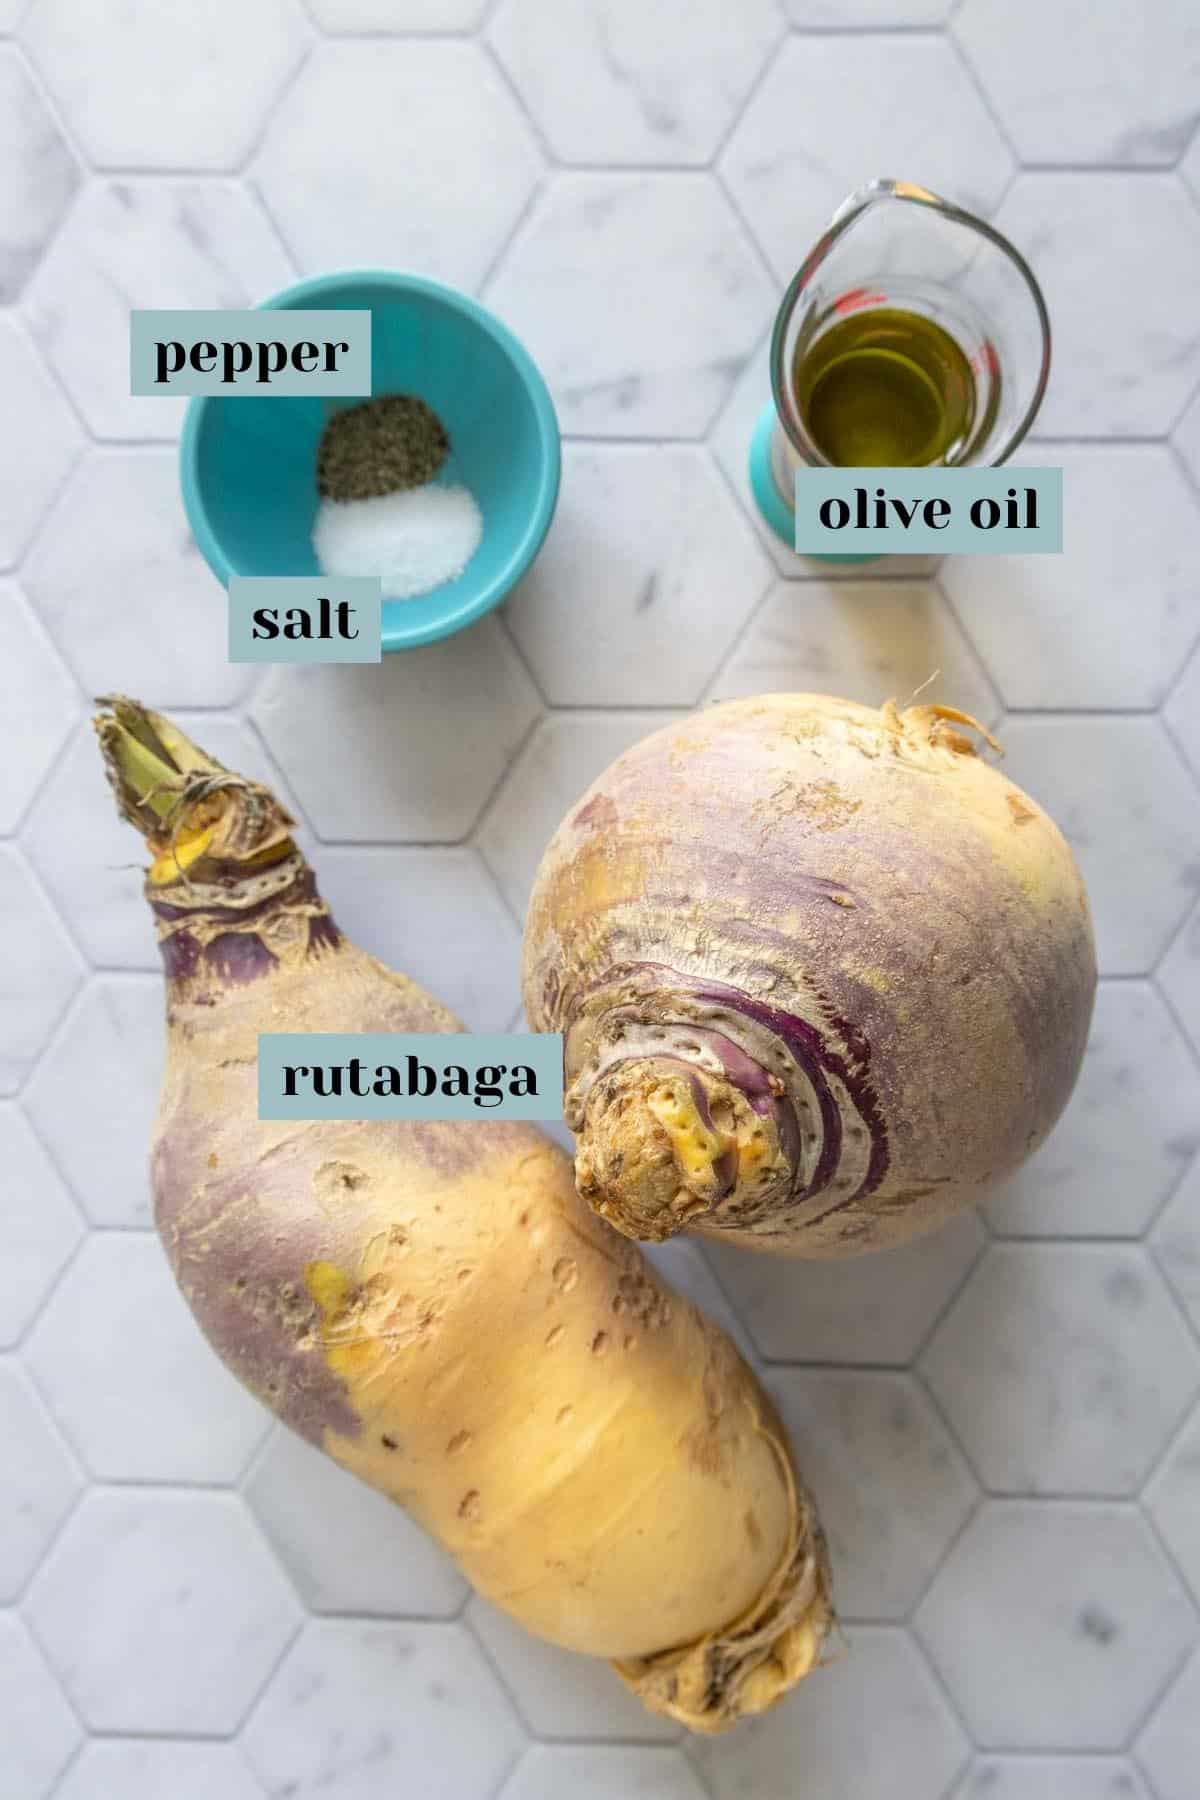 Ingredients for roasted rutabaga on a tile surface with labels.